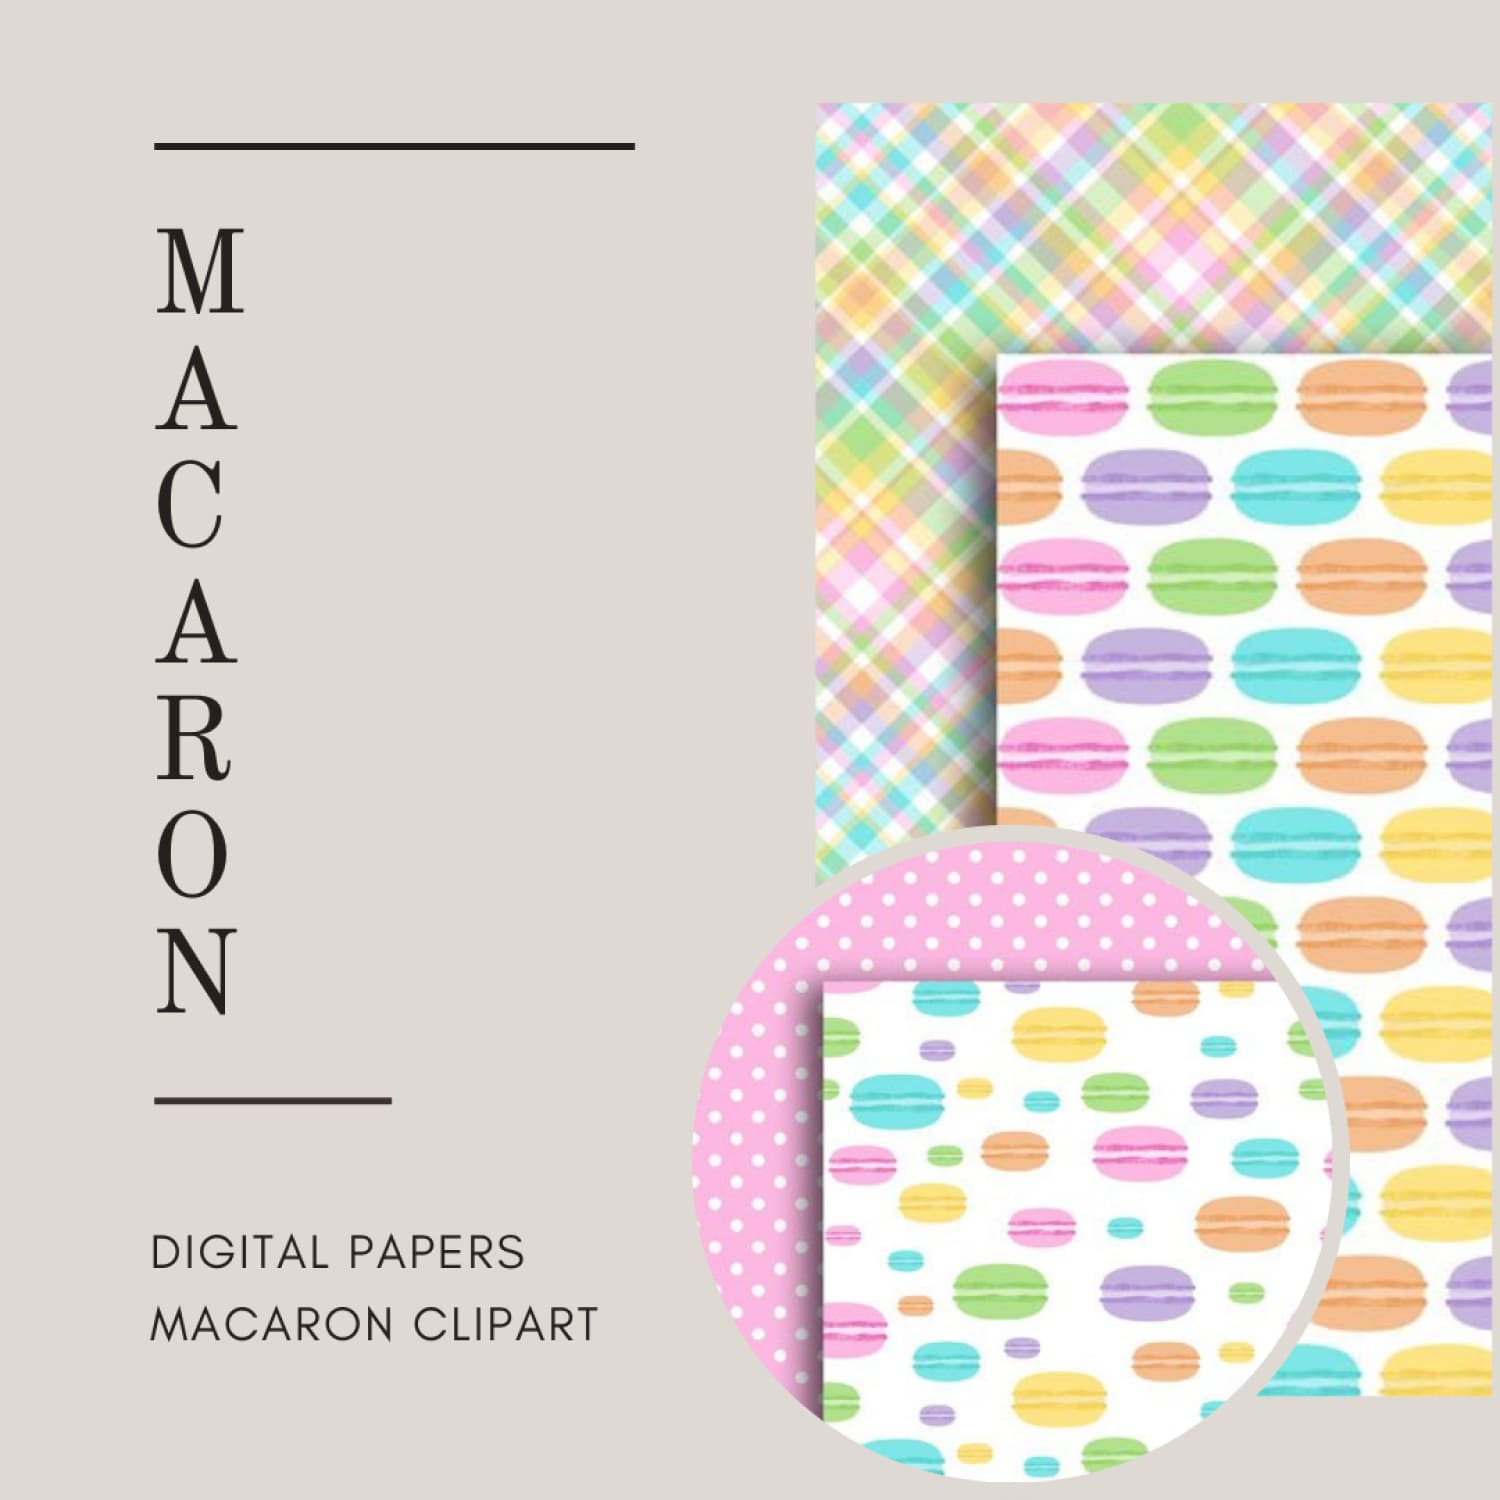 Macaron Digital papers and Macaron Clipart.